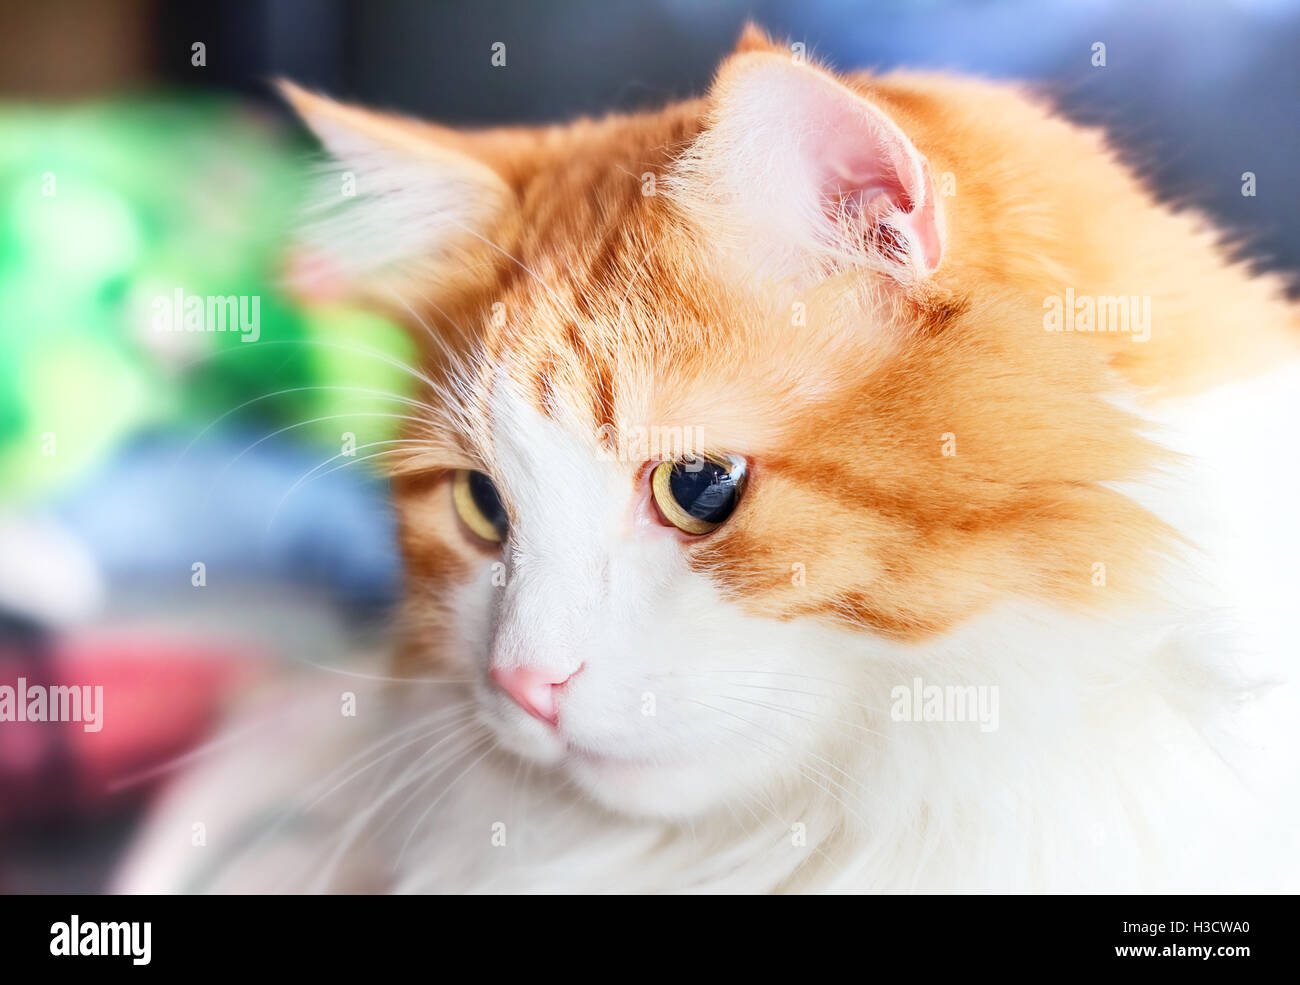 Nice portrait of adult red cat on side Stock Photo